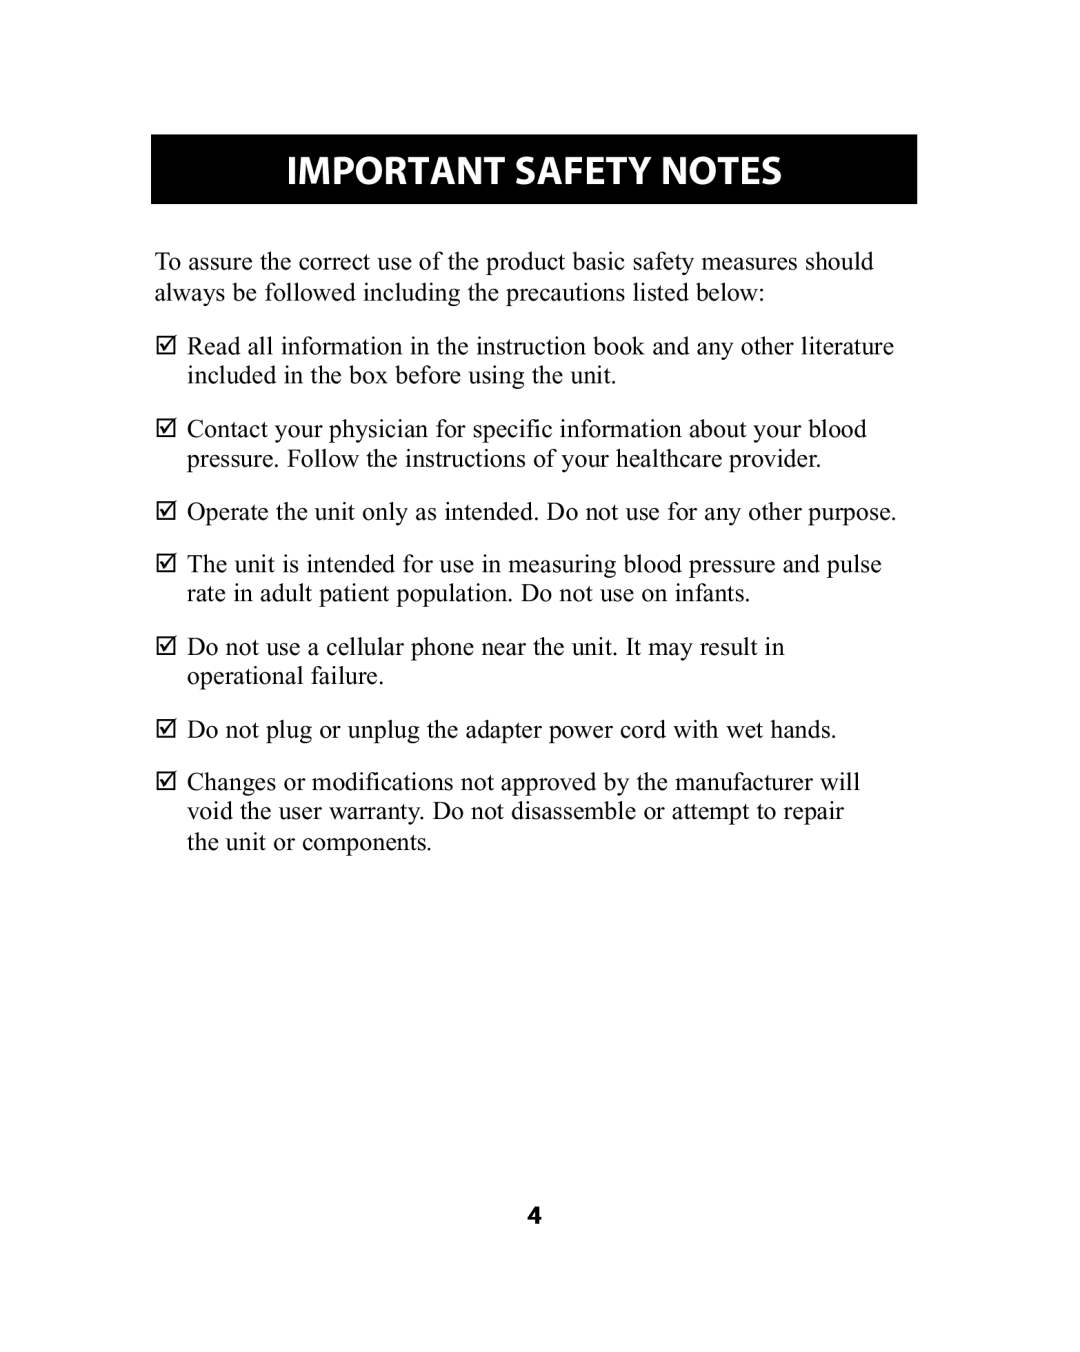 Omron Healthcare HEM-741CREL manual Important Safety Notes 